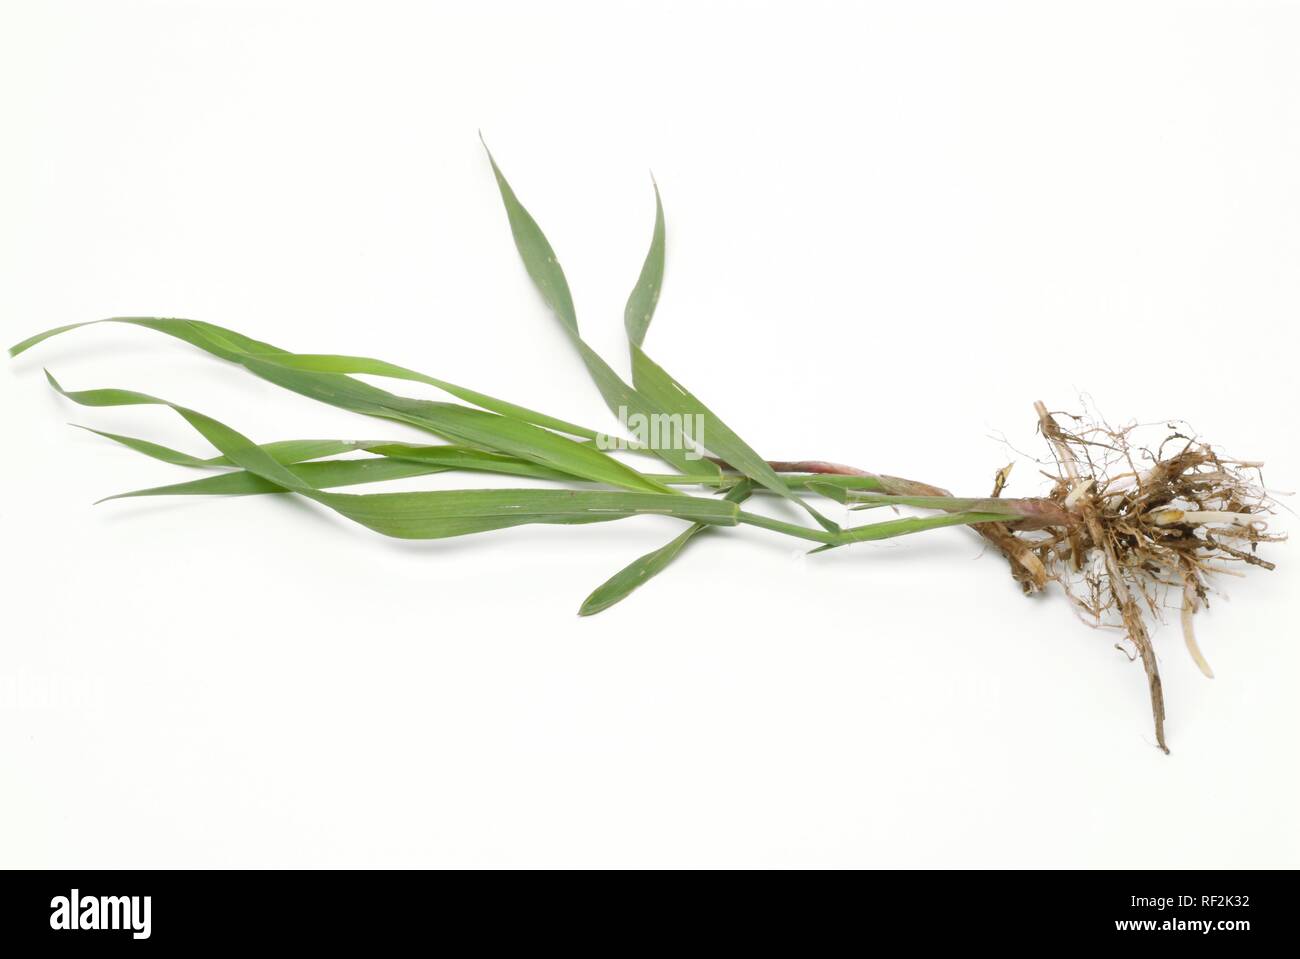 Couchgrass, Couch Grass root (Elymus repens), medicinal plant Stock Photo